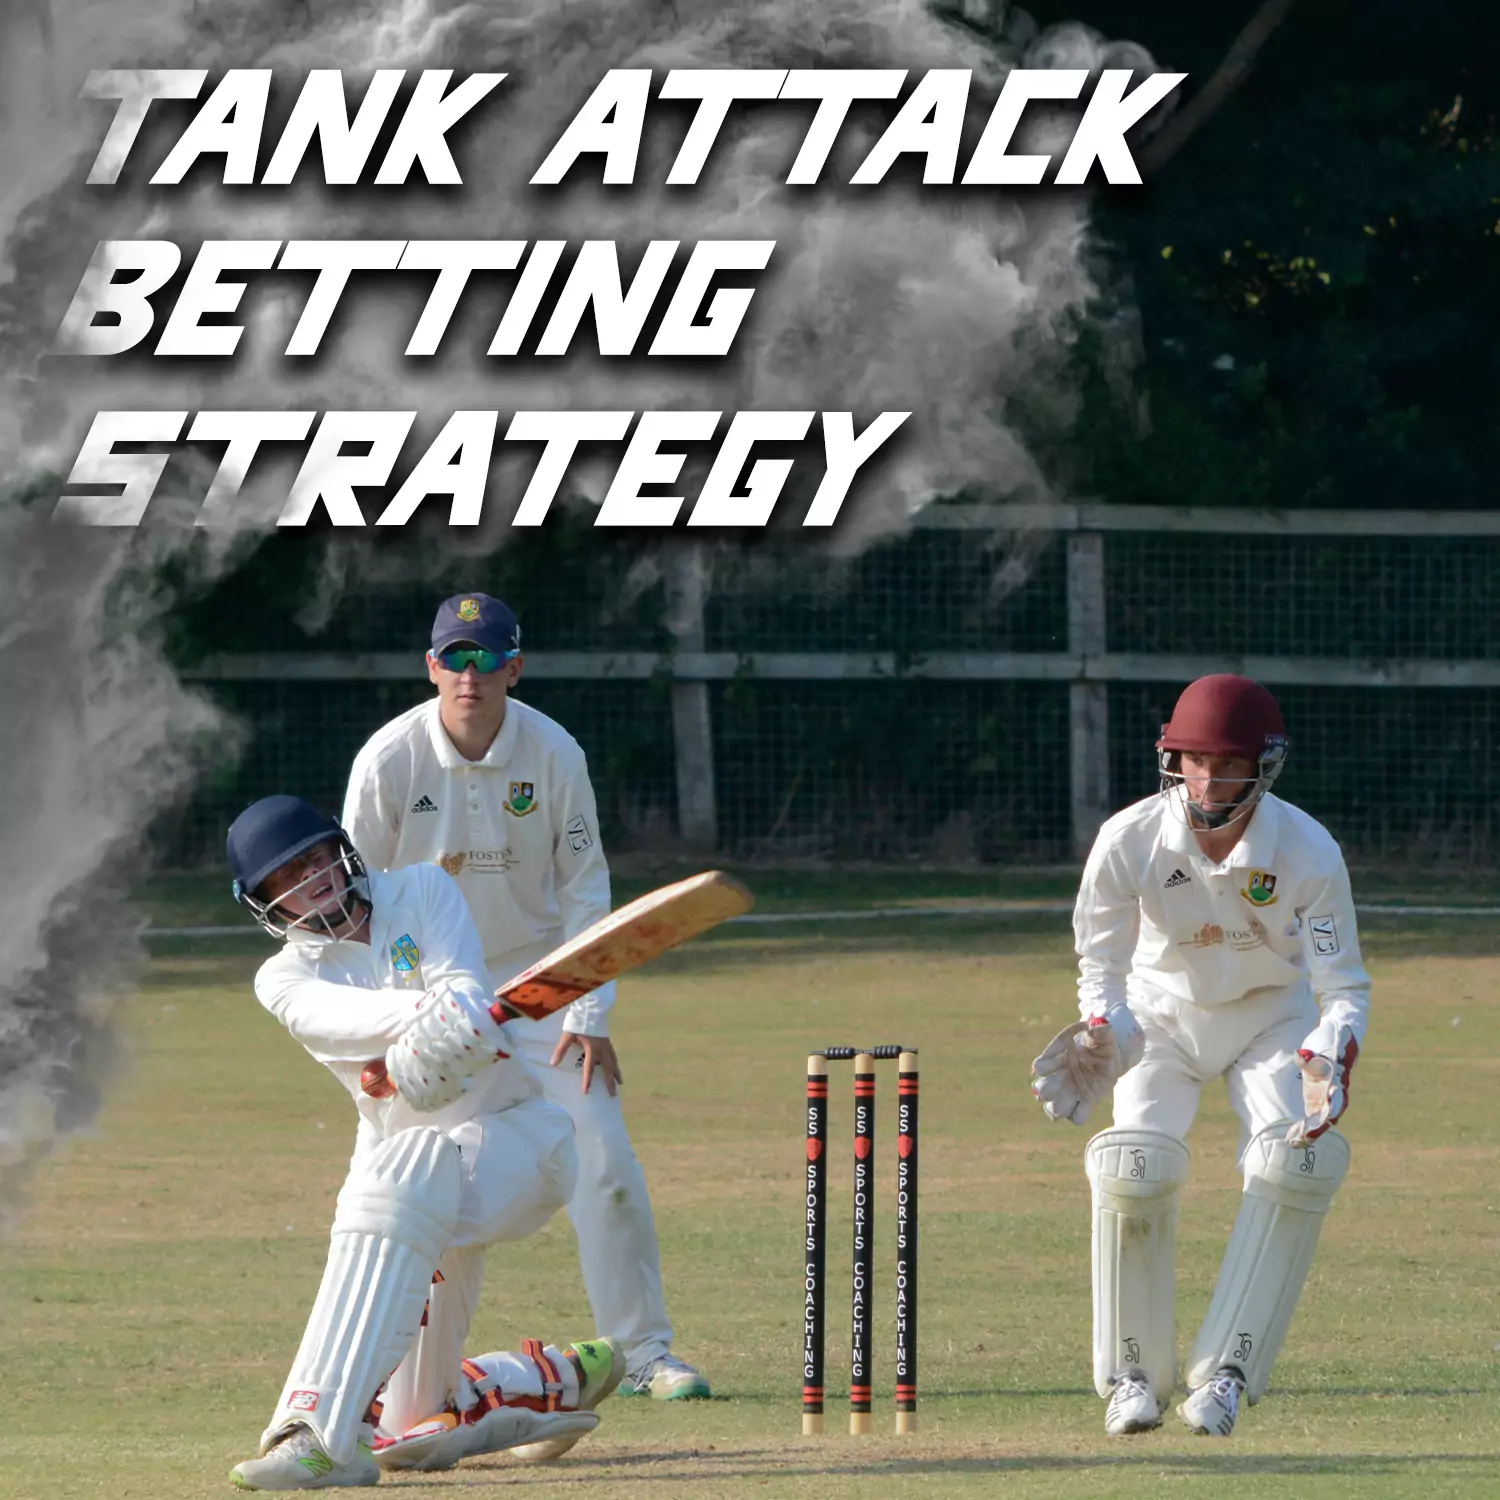 Tank Attack Betting Strategy is very popular for online cricket betting in India.